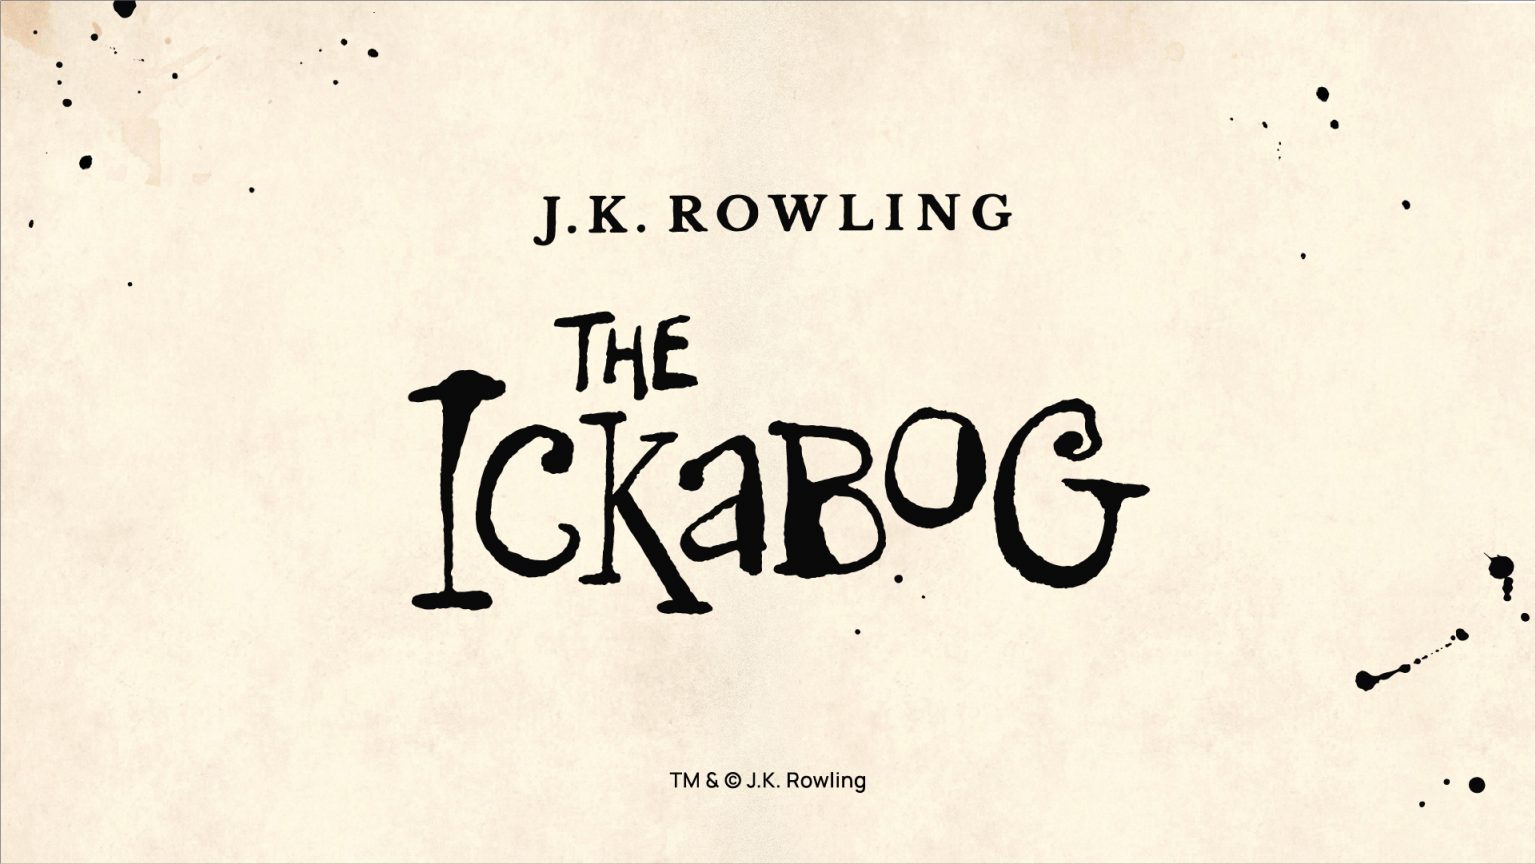 Harry Potter Author J.K. Rowling Is Releasing A Free New Children’s Book Online